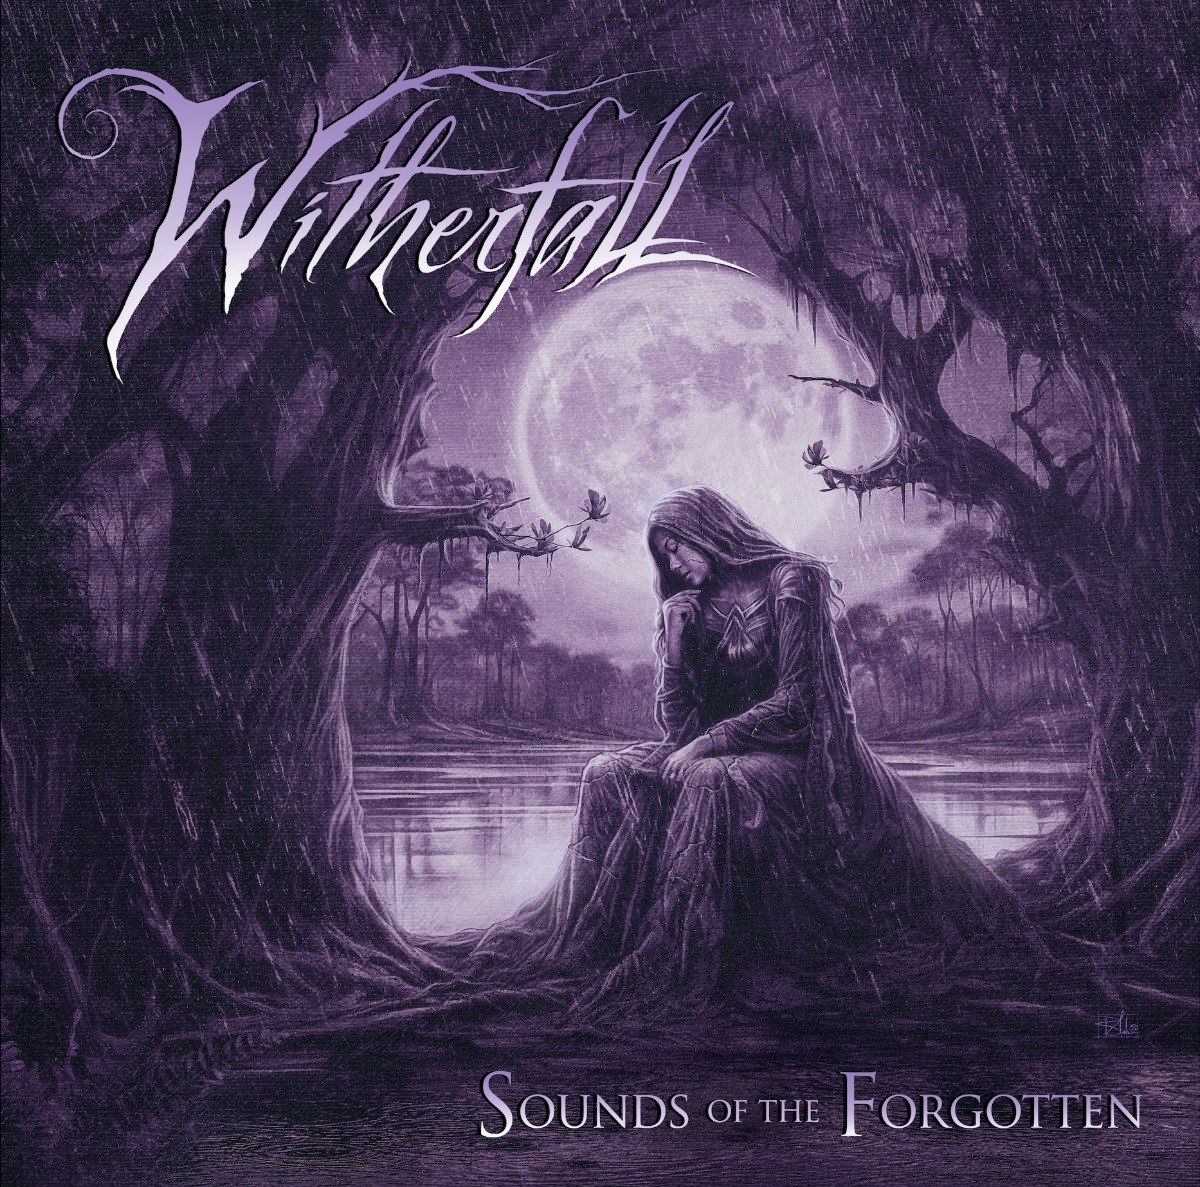 Sounds-Of-The-Forgotten-Witherfall.jpg